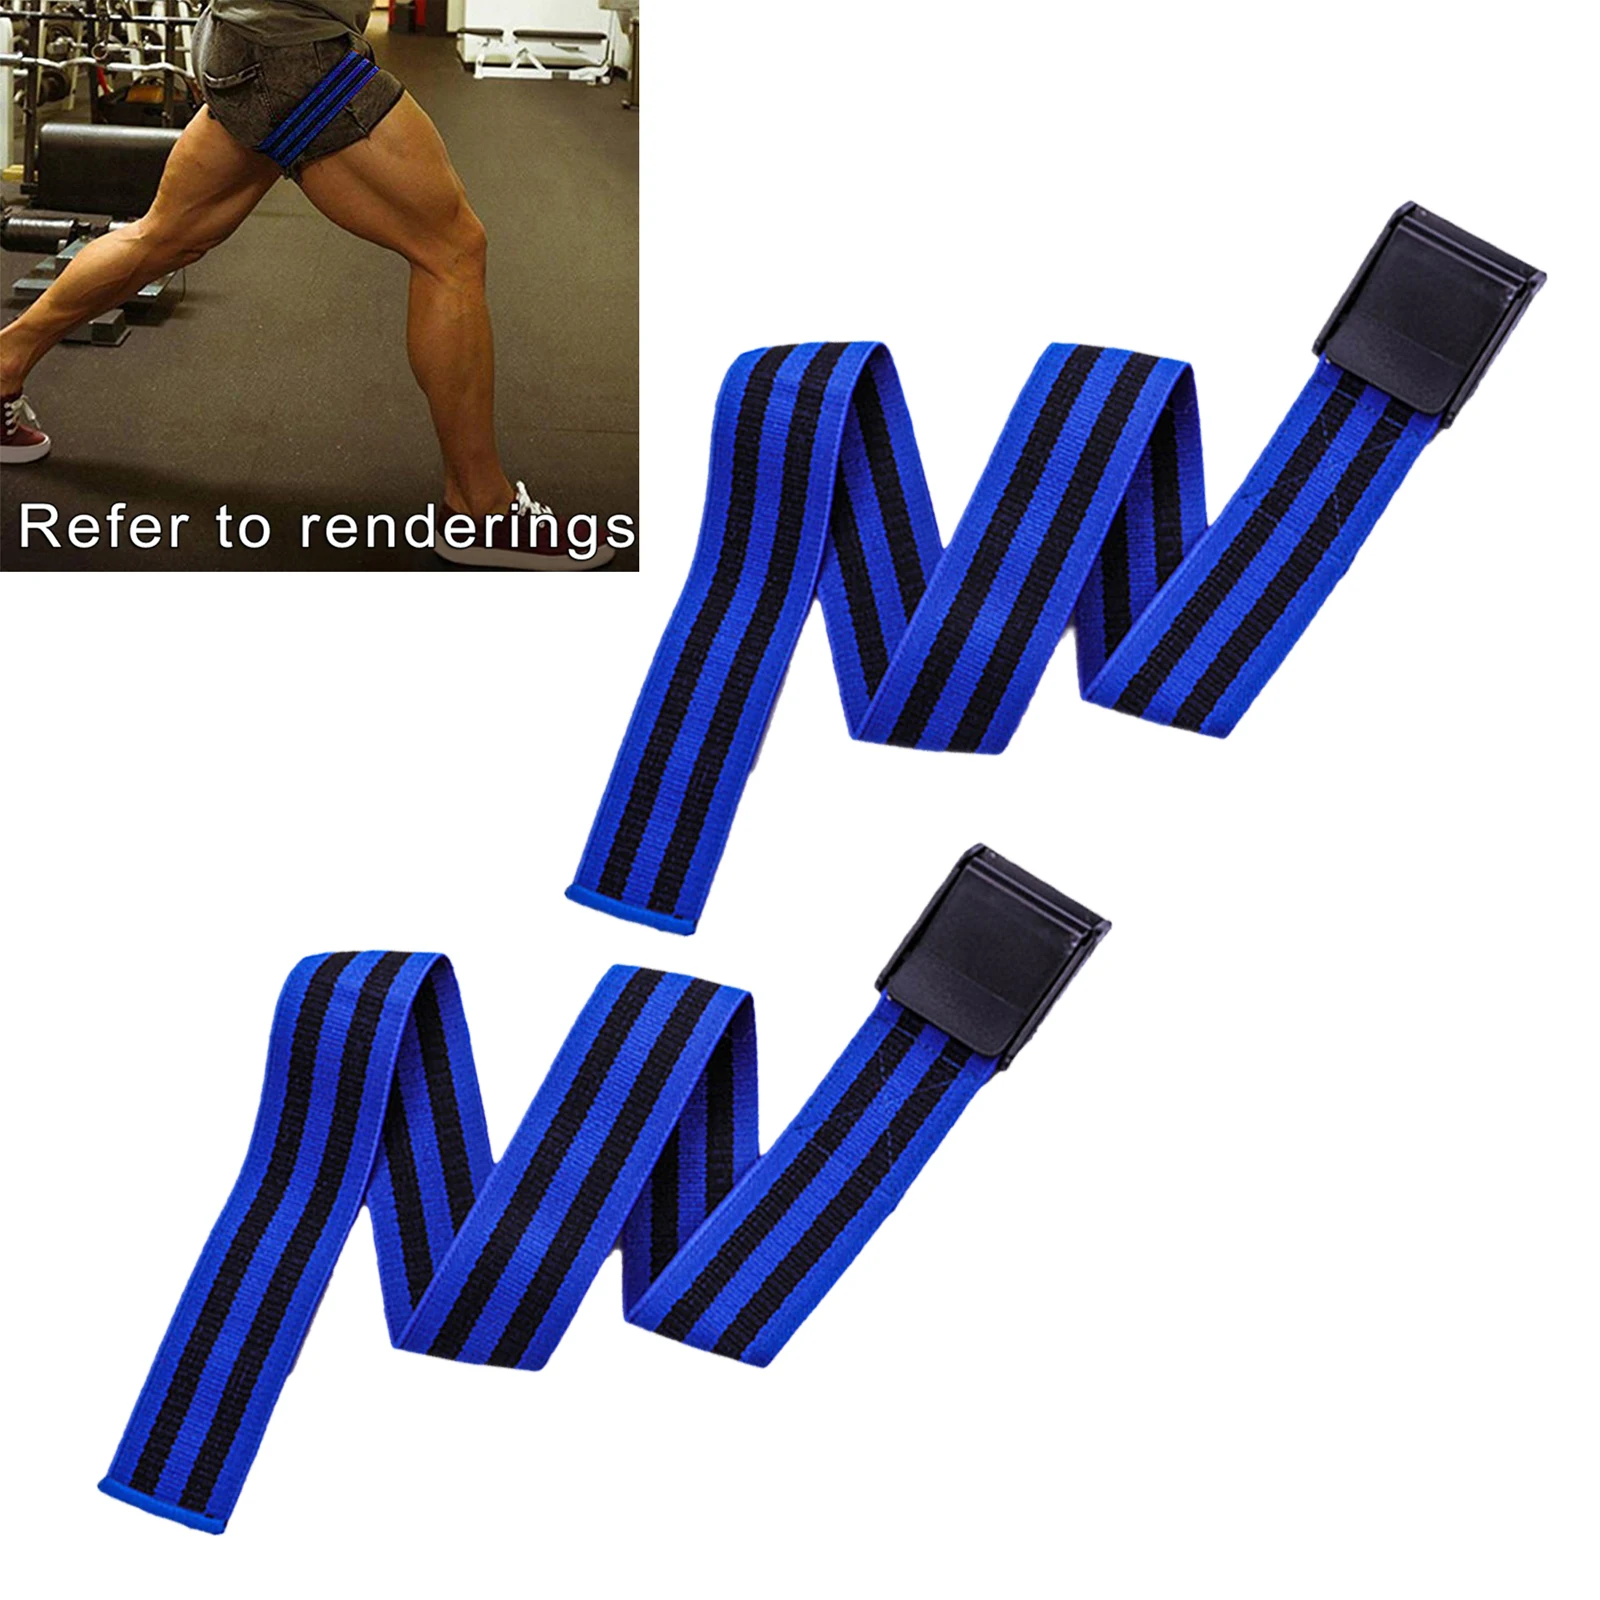 Exercise Occlusion Training Bands Arms legs Blood Flow Restriction Band